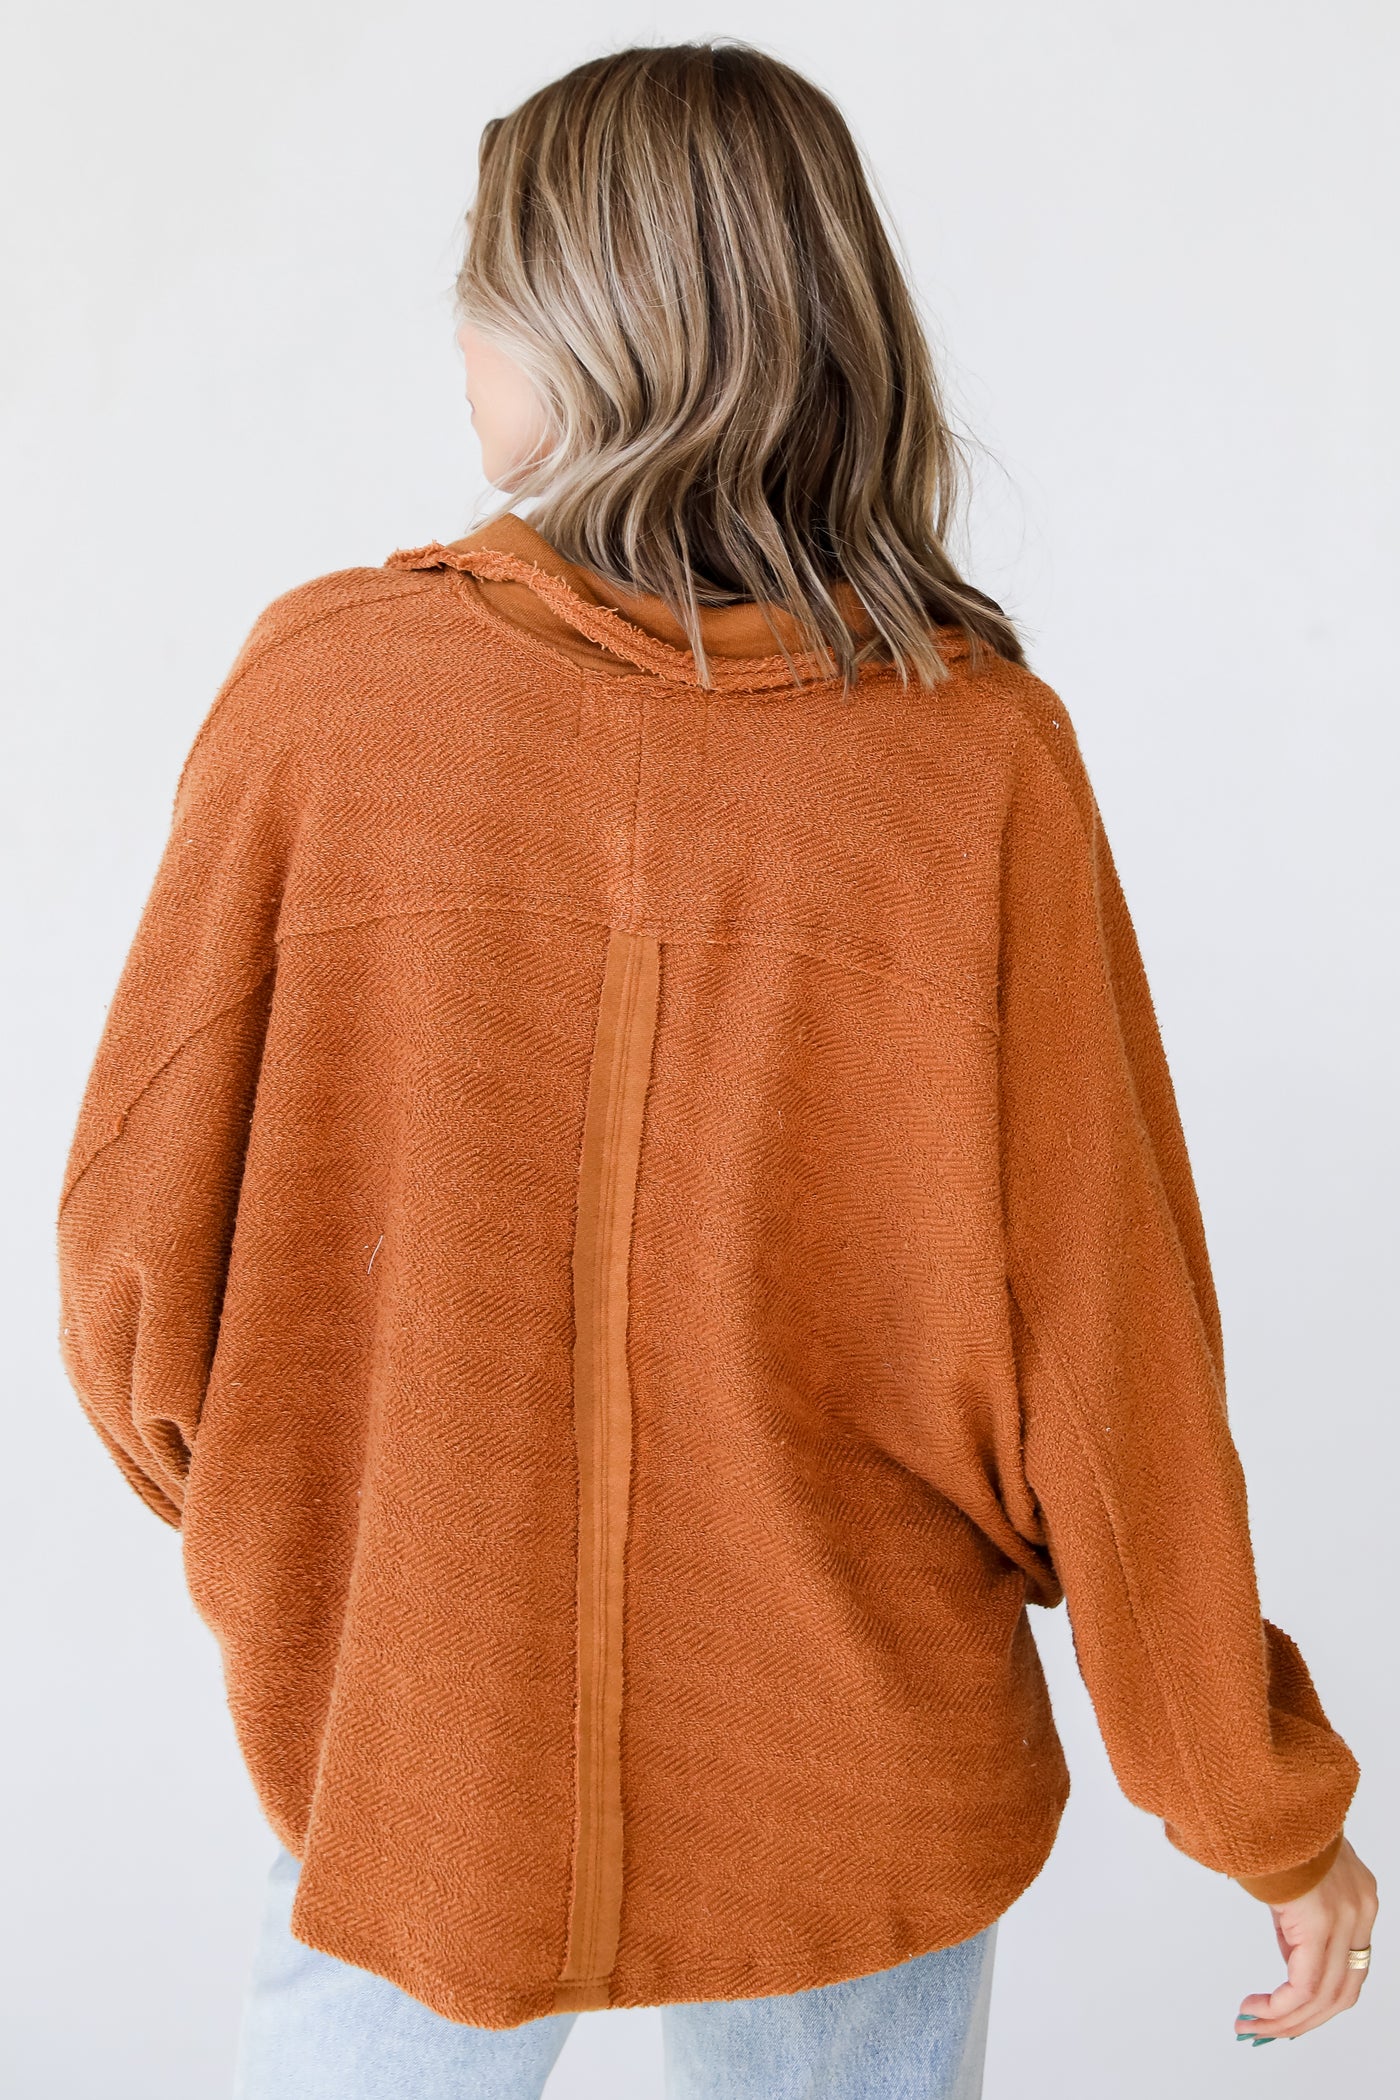 camel Oversized Collared Top back view